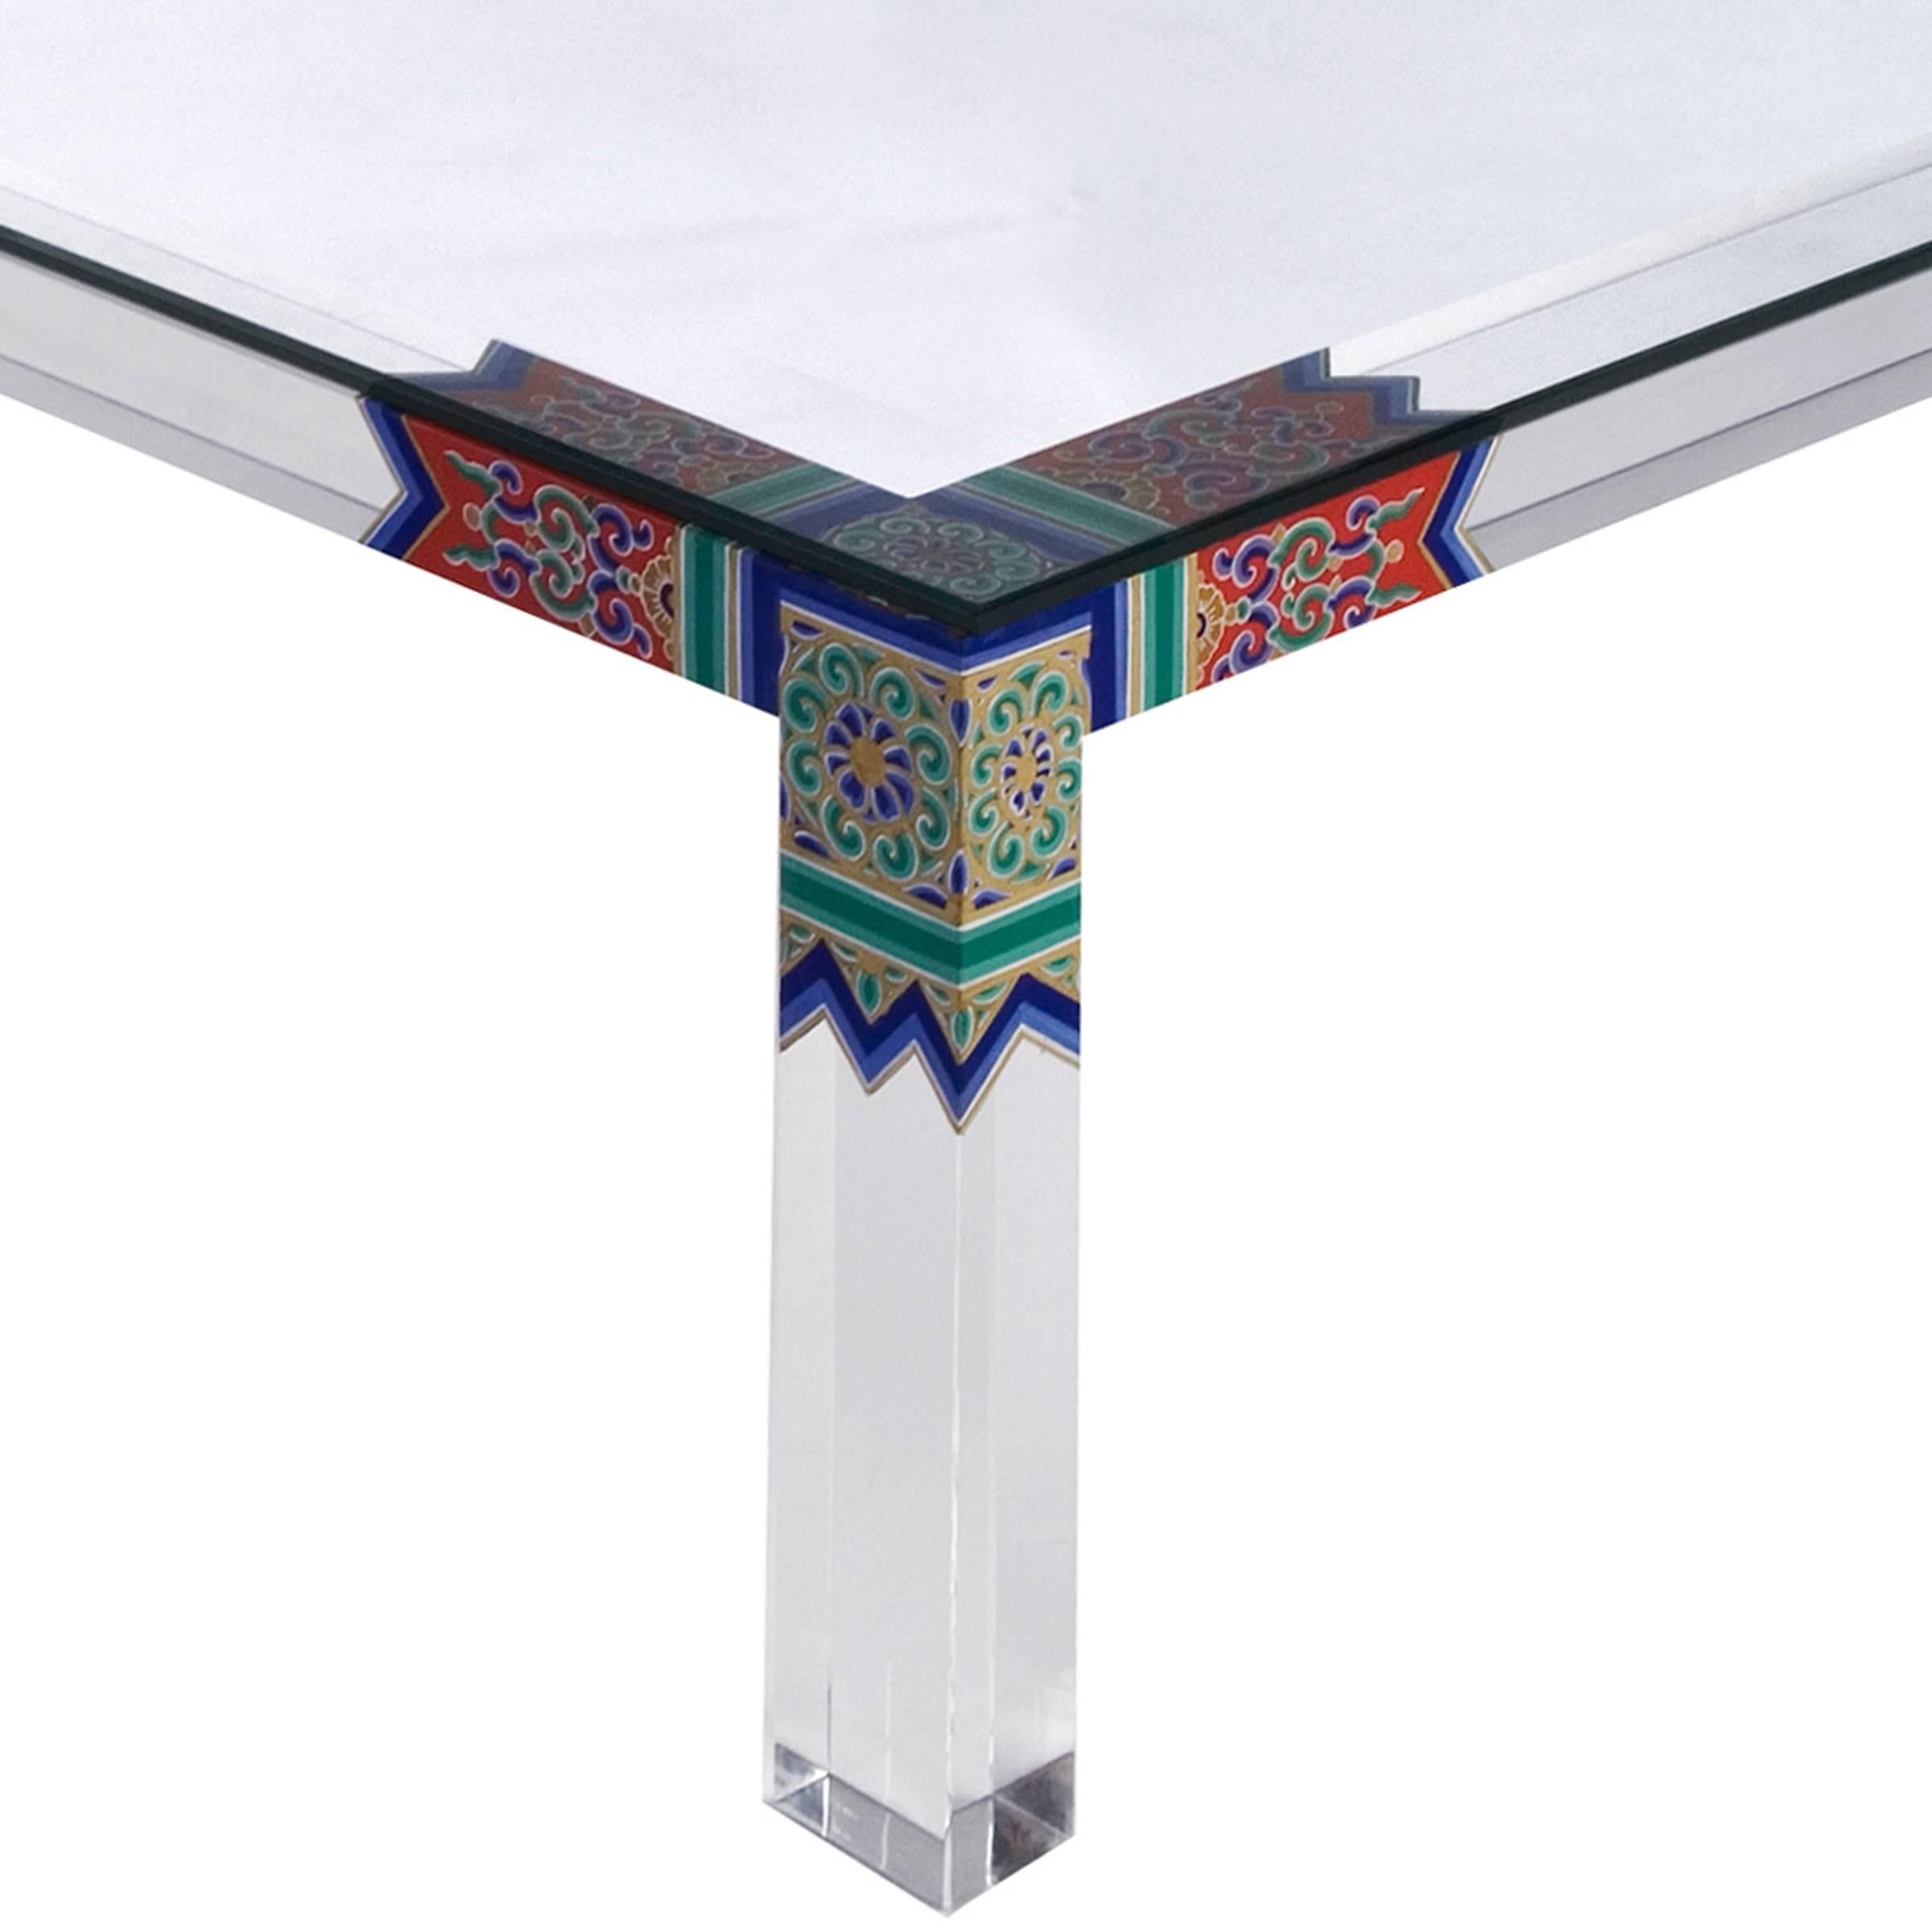 Chinese Summer Palace Low Table by July Zhou